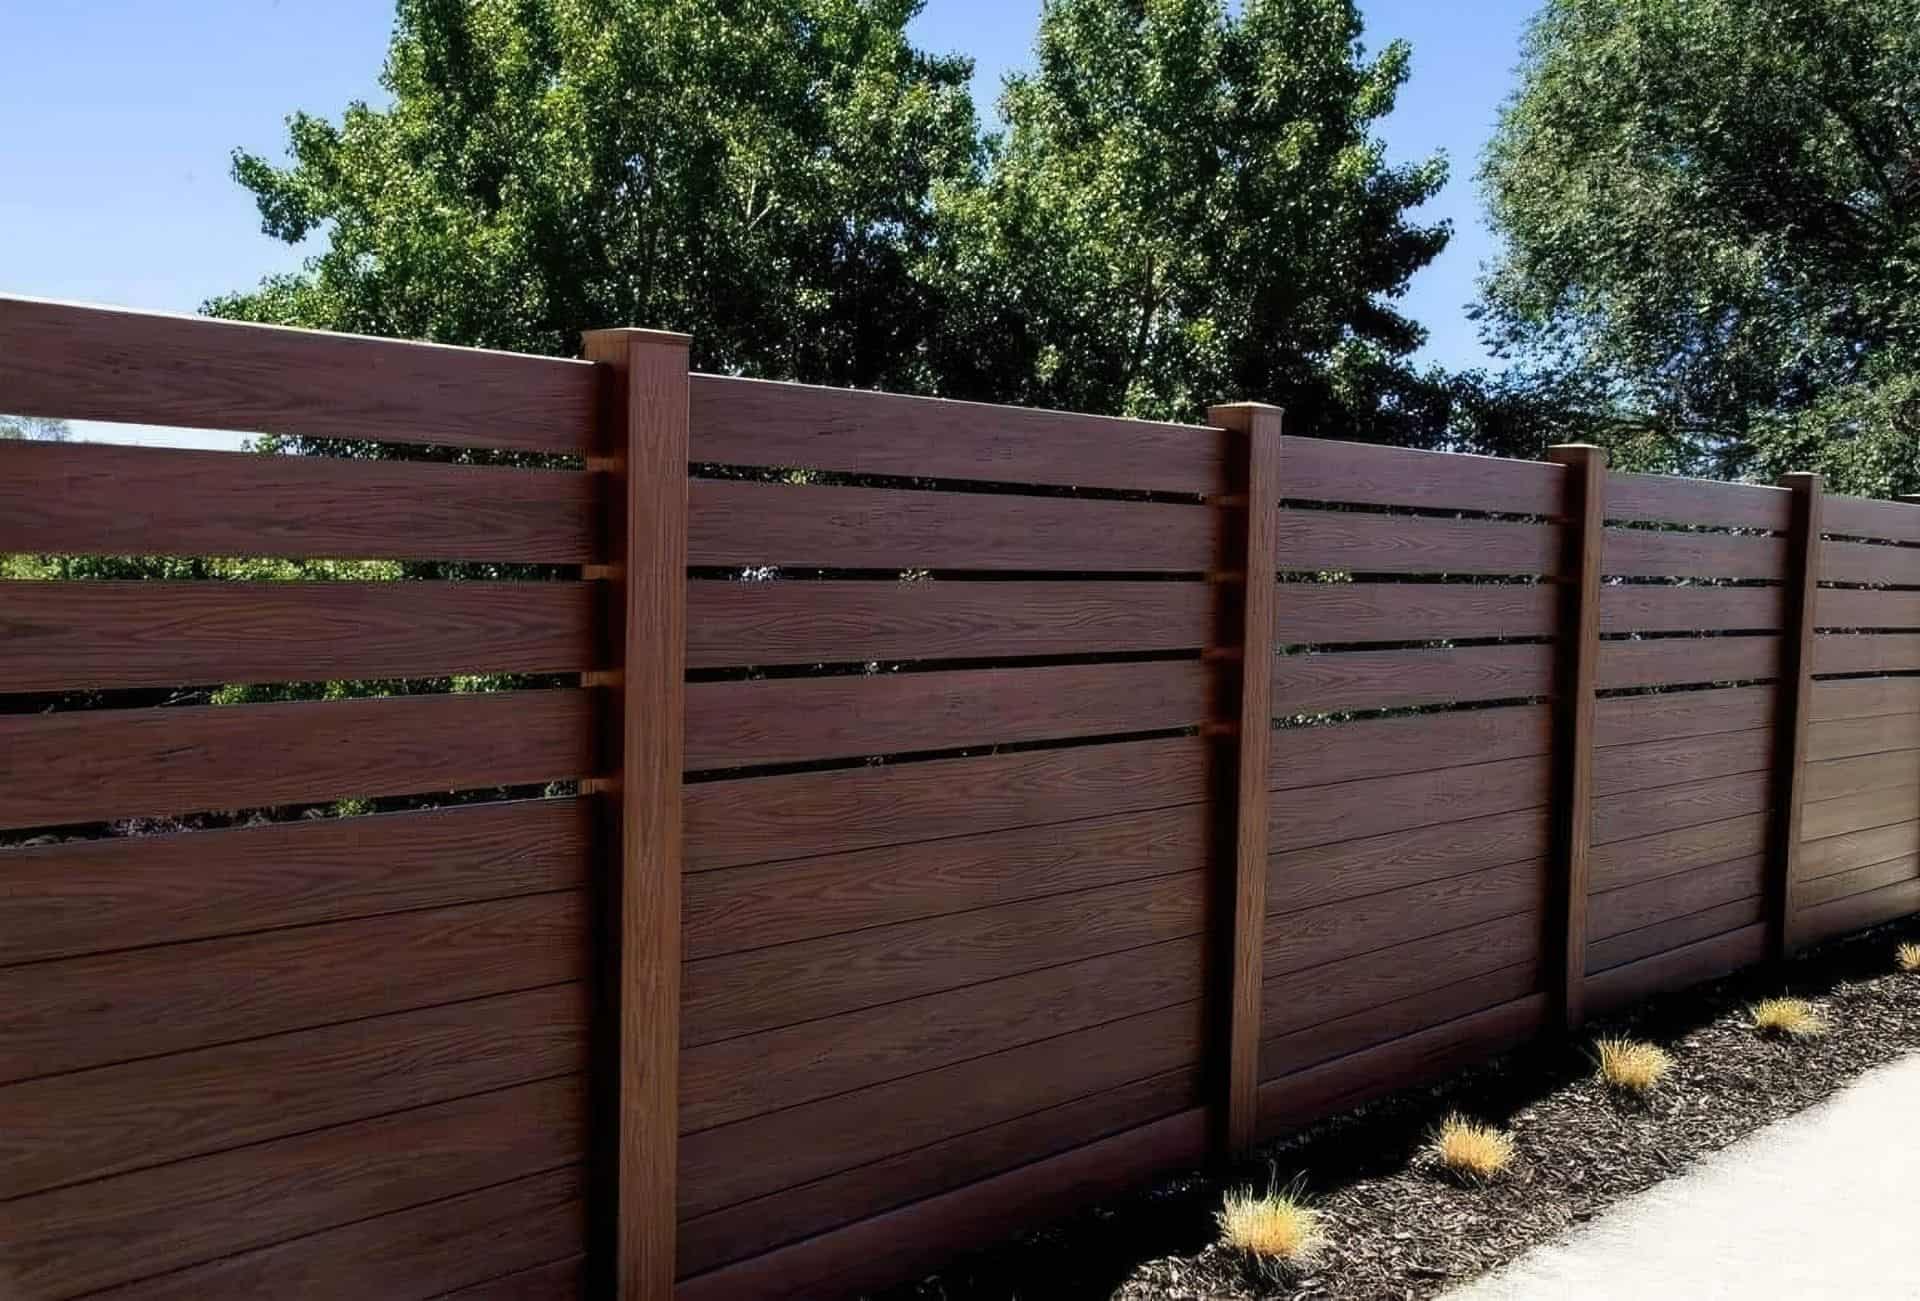 Partially slatted, semi-privacy fence in front of trees and beside concrete walkway with black stones on the side.